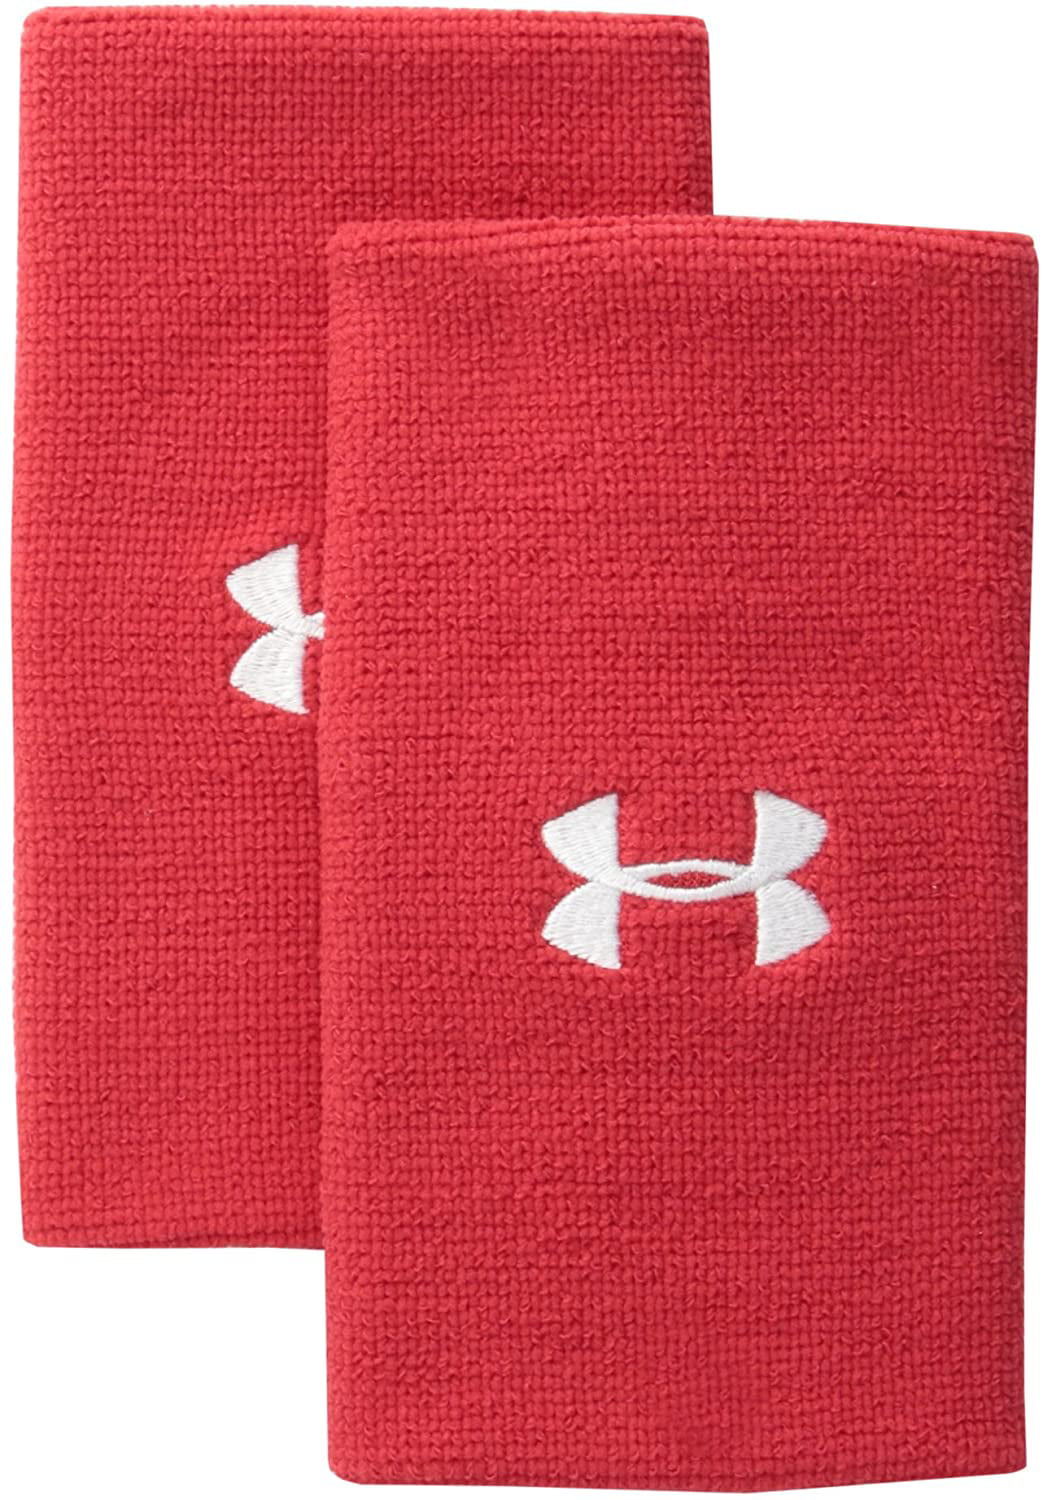 Under Armour Adult 6-inch Performance Wristband 2-Pack 